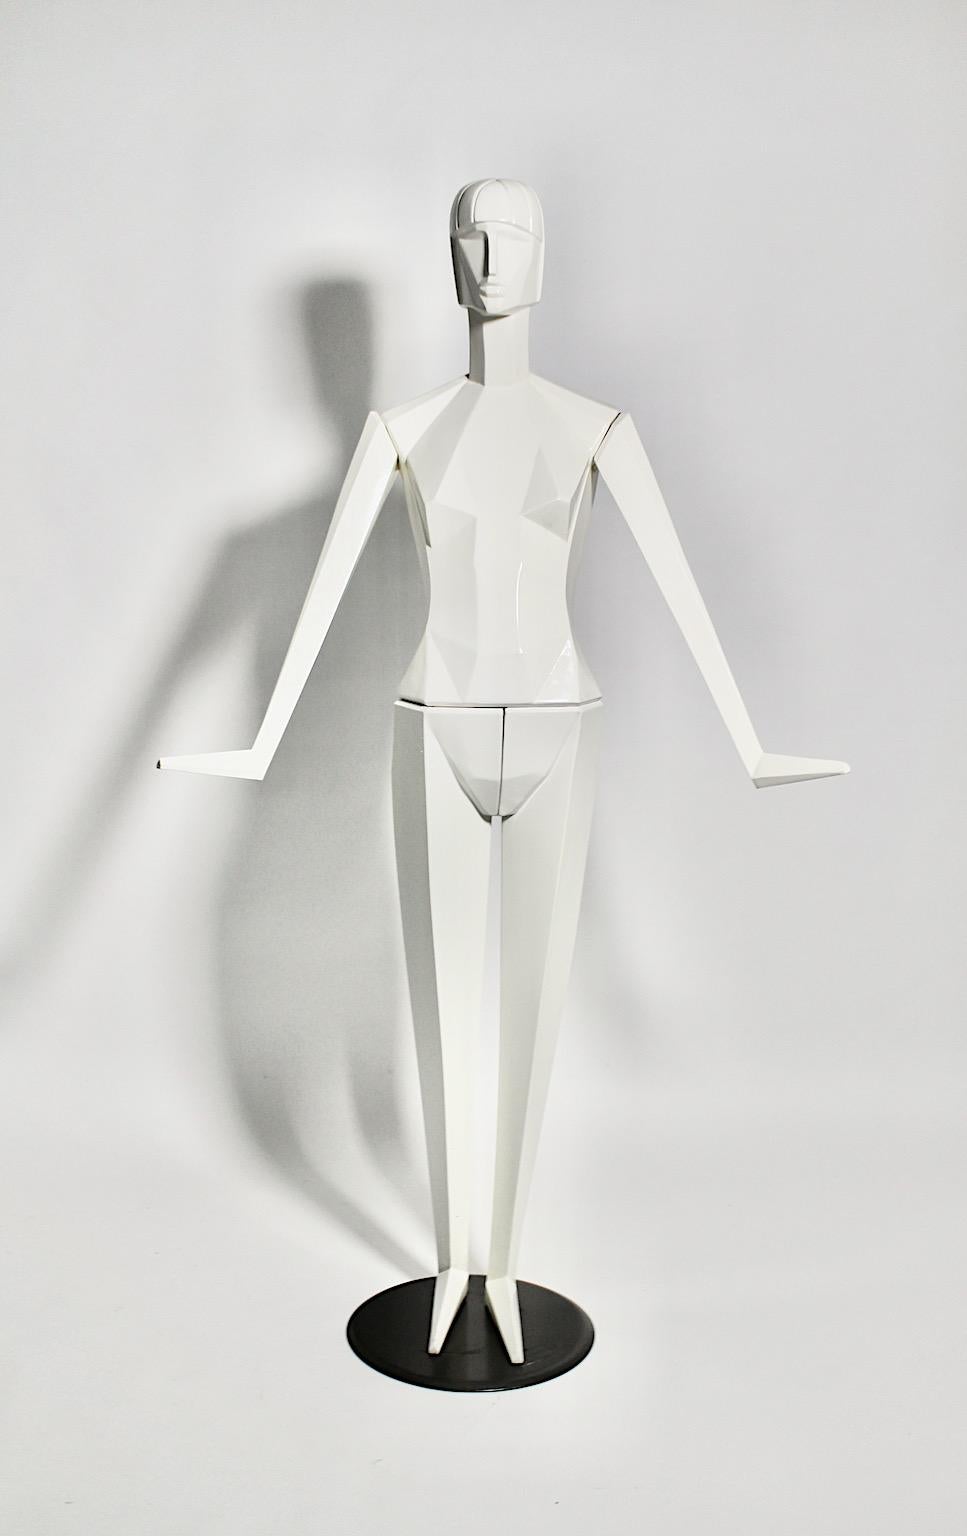 Art Deco Revival white full body vintage plastic mannequin, which was designed and manufactured, 1980s, France.
The mannequin shows geometric and cubism inspired features. The body with metal connections from polyester and white coated wood stands